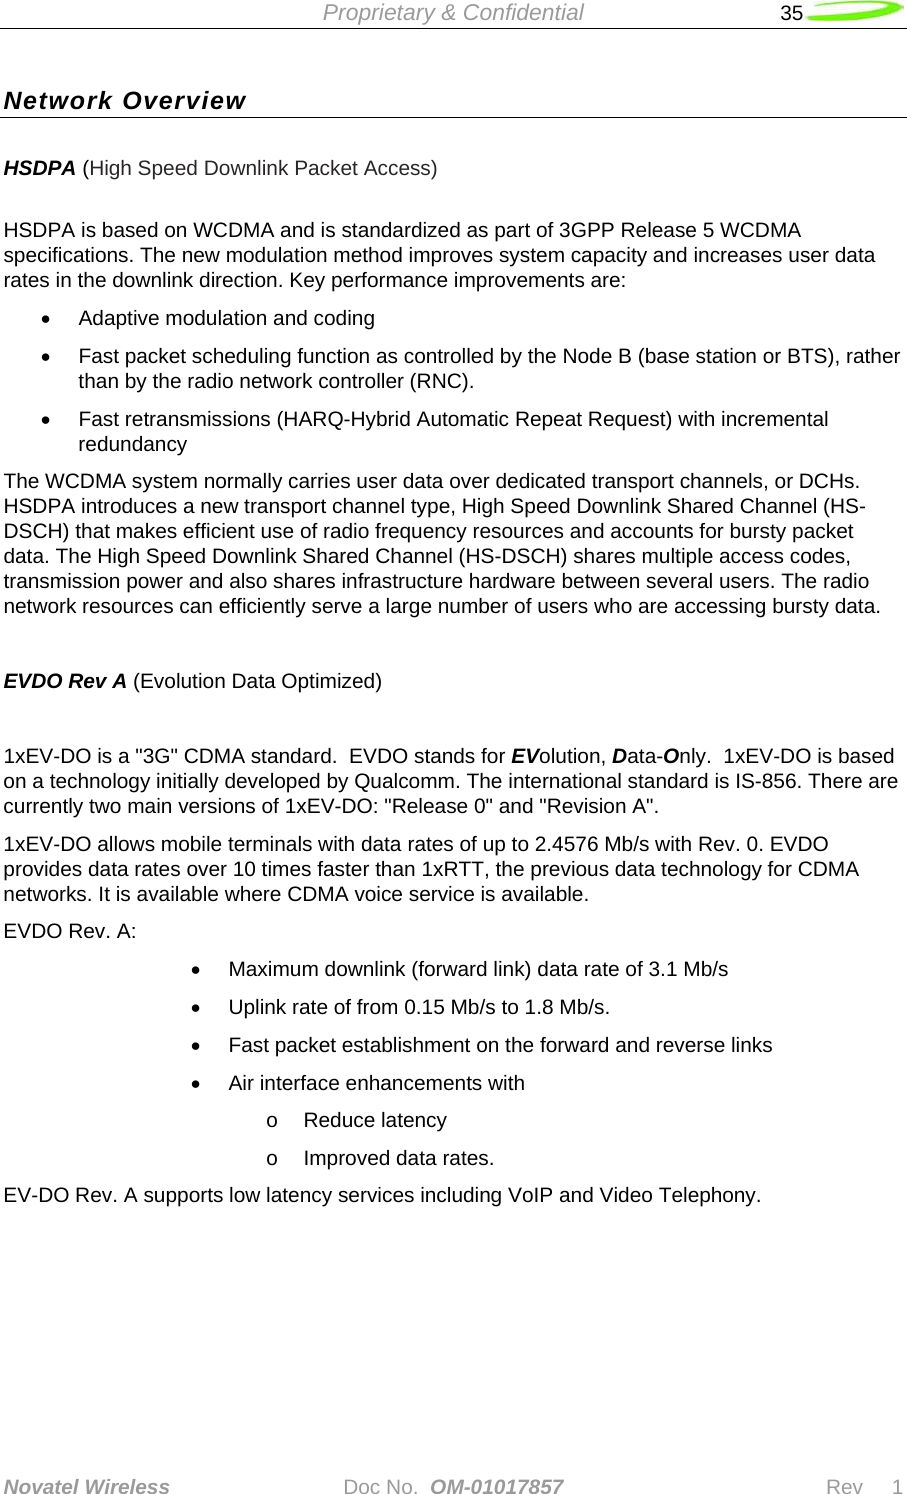  Proprietary &amp; Confidential   35   Novatel Wireless   Doc No.  OM-01017857                              Rev     1  Network Overview HSDPA (High Speed Downlink Packet Access)   HSDPA is based on WCDMA and is standardized as part of 3GPP Release 5 WCDMA specifications. The new modulation method improves system capacity and increases user data rates in the downlink direction. Key performance improvements are: •  Adaptive modulation and coding •  Fast packet scheduling function as controlled by the Node B (base station or BTS), rather than by the radio network controller (RNC). •  Fast retransmissions (HARQ-Hybrid Automatic Repeat Request) with incremental redundancy The WCDMA system normally carries user data over dedicated transport channels, or DCHs. HSDPA introduces a new transport channel type, High Speed Downlink Shared Channel (HS-DSCH) that makes efficient use of radio frequency resources and accounts for bursty packet data. The High Speed Downlink Shared Channel (HS-DSCH) shares multiple access codes, transmission power and also shares infrastructure hardware between several users. The radio network resources can efficiently serve a large number of users who are accessing bursty data.   EVDO Rev A (Evolution Data Optimized)  1xEV-DO is a &quot;3G&quot; CDMA standard.  EVDO stands for EVolution, Data-Only.  1xEV-DO is based on a technology initially developed by Qualcomm. The international standard is IS-856. There are currently two main versions of 1xEV-DO: &quot;Release 0&quot; and &quot;Revision A&quot;.  1xEV-DO allows mobile terminals with data rates of up to 2.4576 Mb/s with Rev. 0. EVDO provides data rates over 10 times faster than 1xRTT, the previous data technology for CDMA networks. It is available where CDMA voice service is available.  EVDO Rev. A:  •  Maximum downlink (forward link) data rate of 3.1 Mb/s •  Uplink rate of from 0.15 Mb/s to 1.8 Mb/s.  •  Fast packet establishment on the forward and reverse links  •  Air interface enhancements with o  Reduce latency  o  Improved data rates. EV-DO Rev. A supports low latency services including VoIP and Video Telephony.      